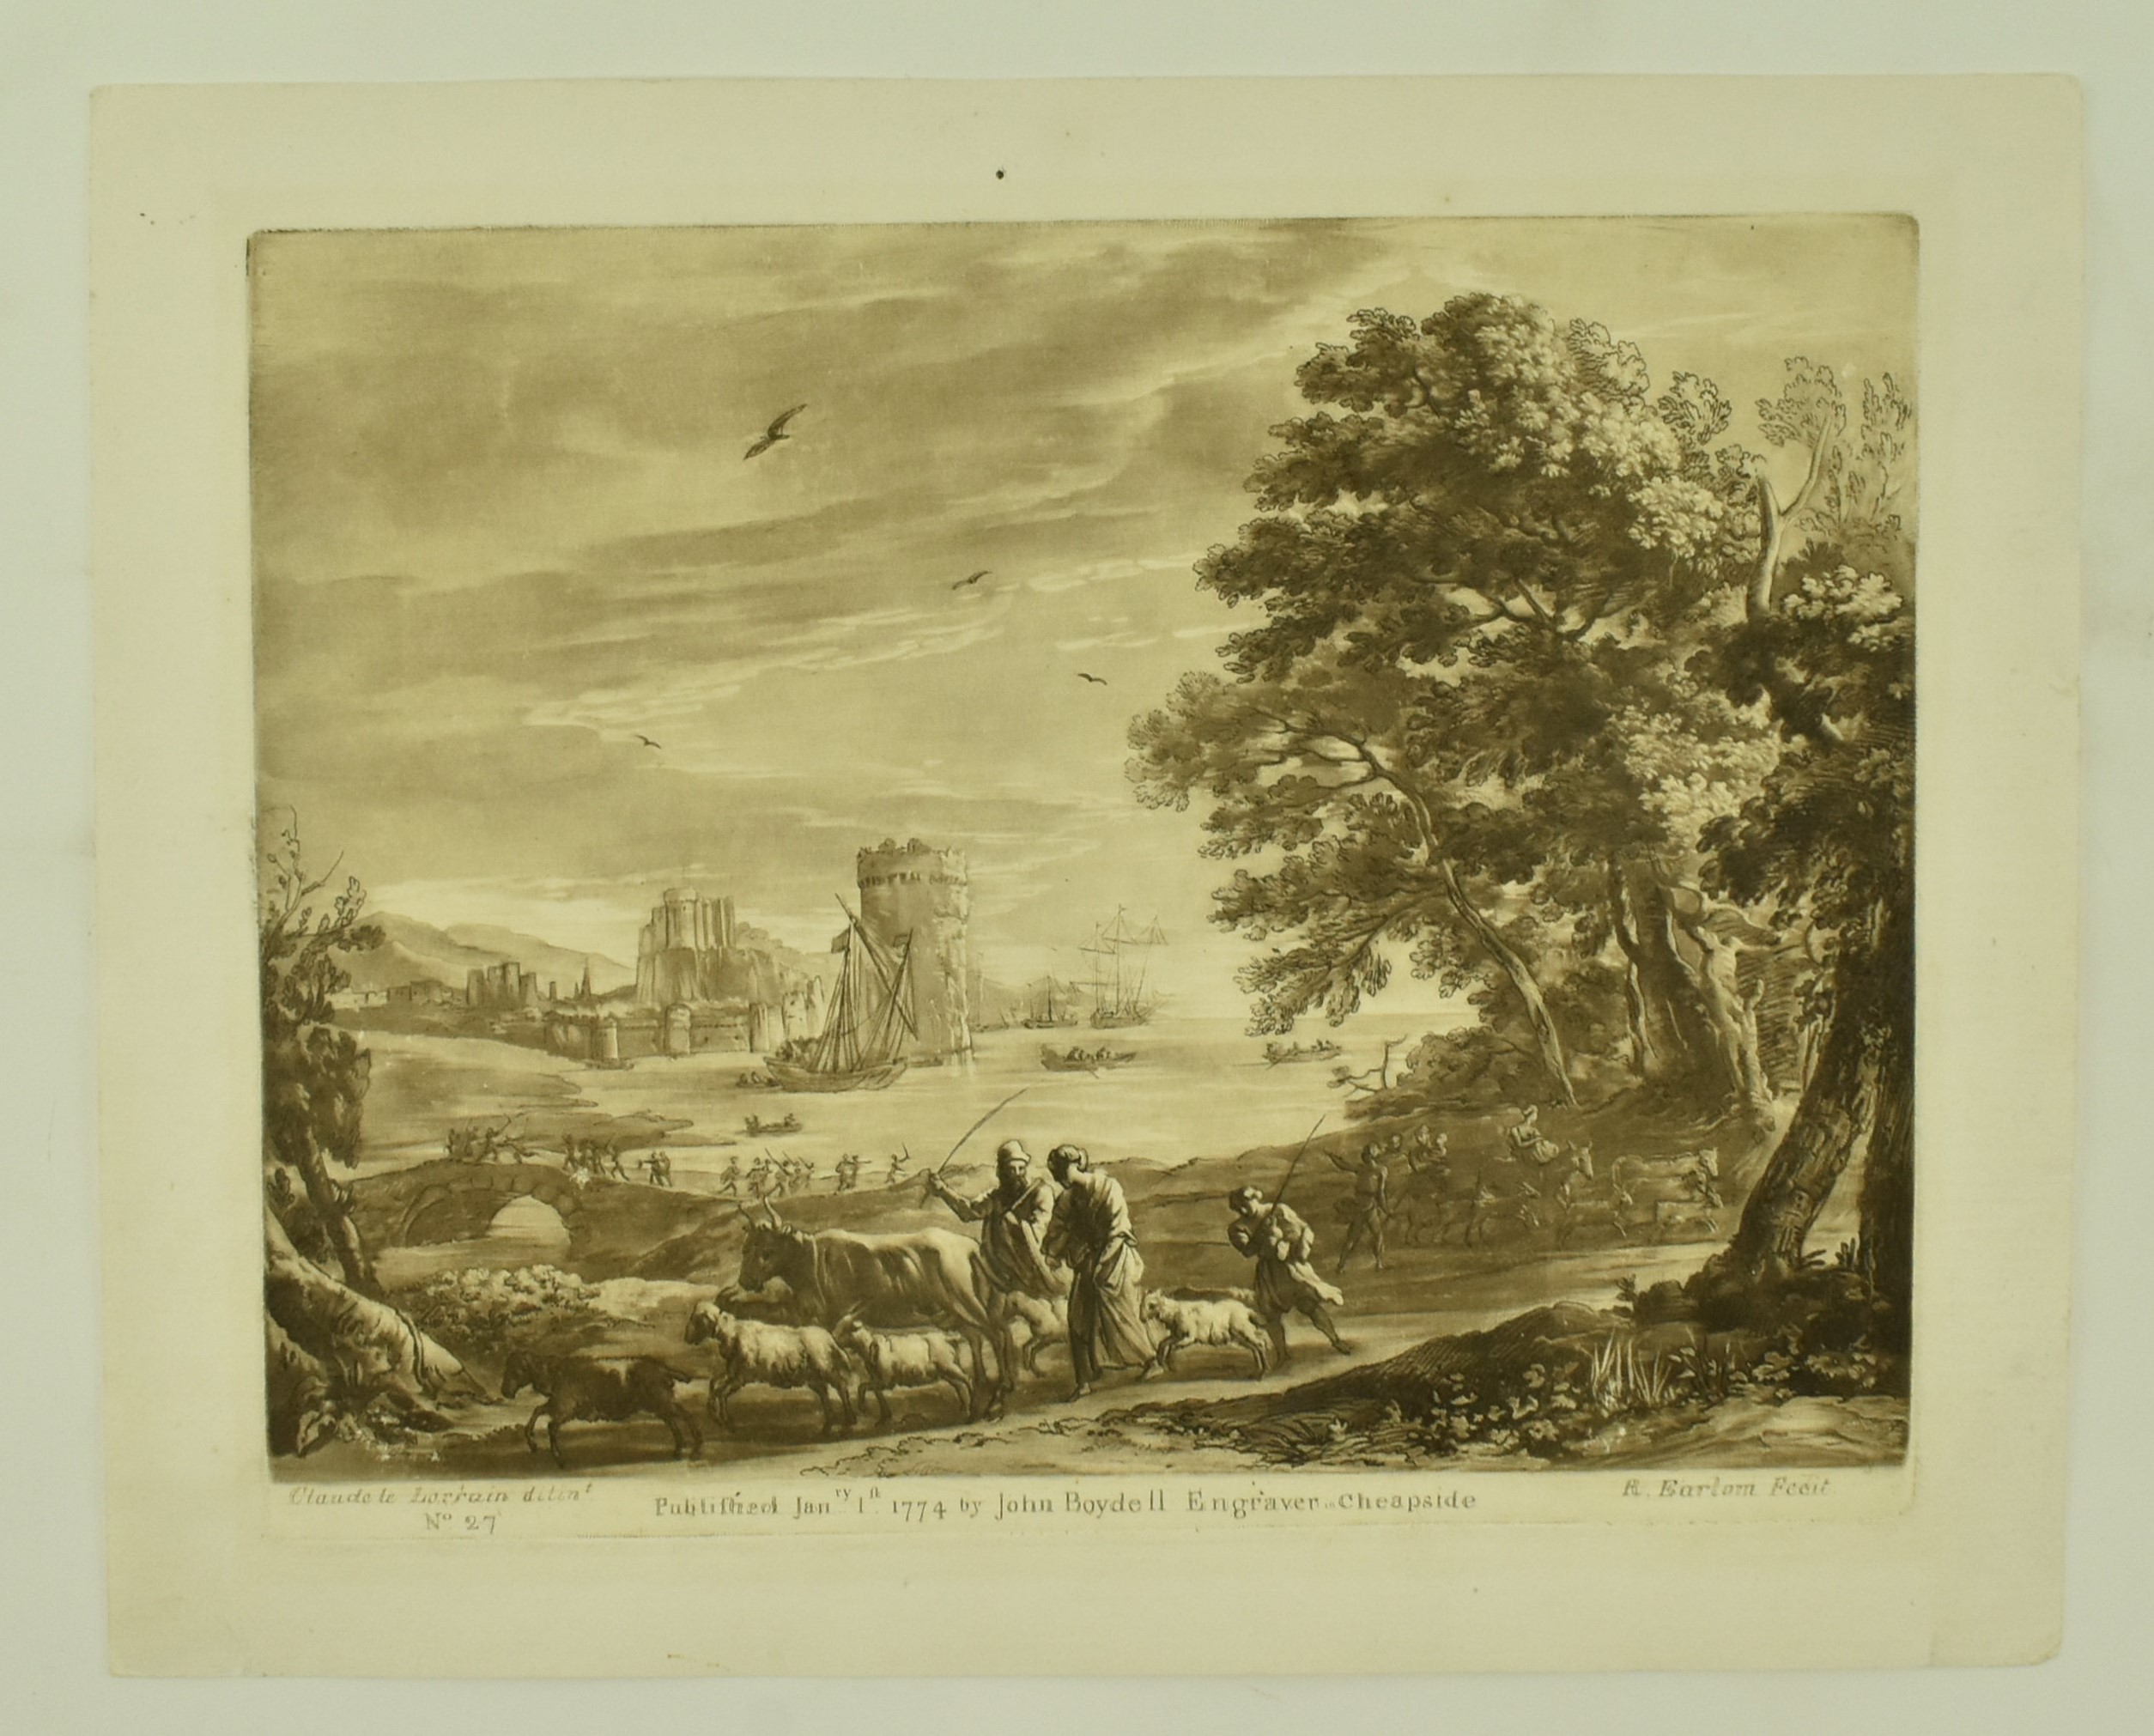 ETCHING OF CASTLE RUINS - R. EARLOM AFTER CLAUDE LE LORRAIN - Image 2 of 6